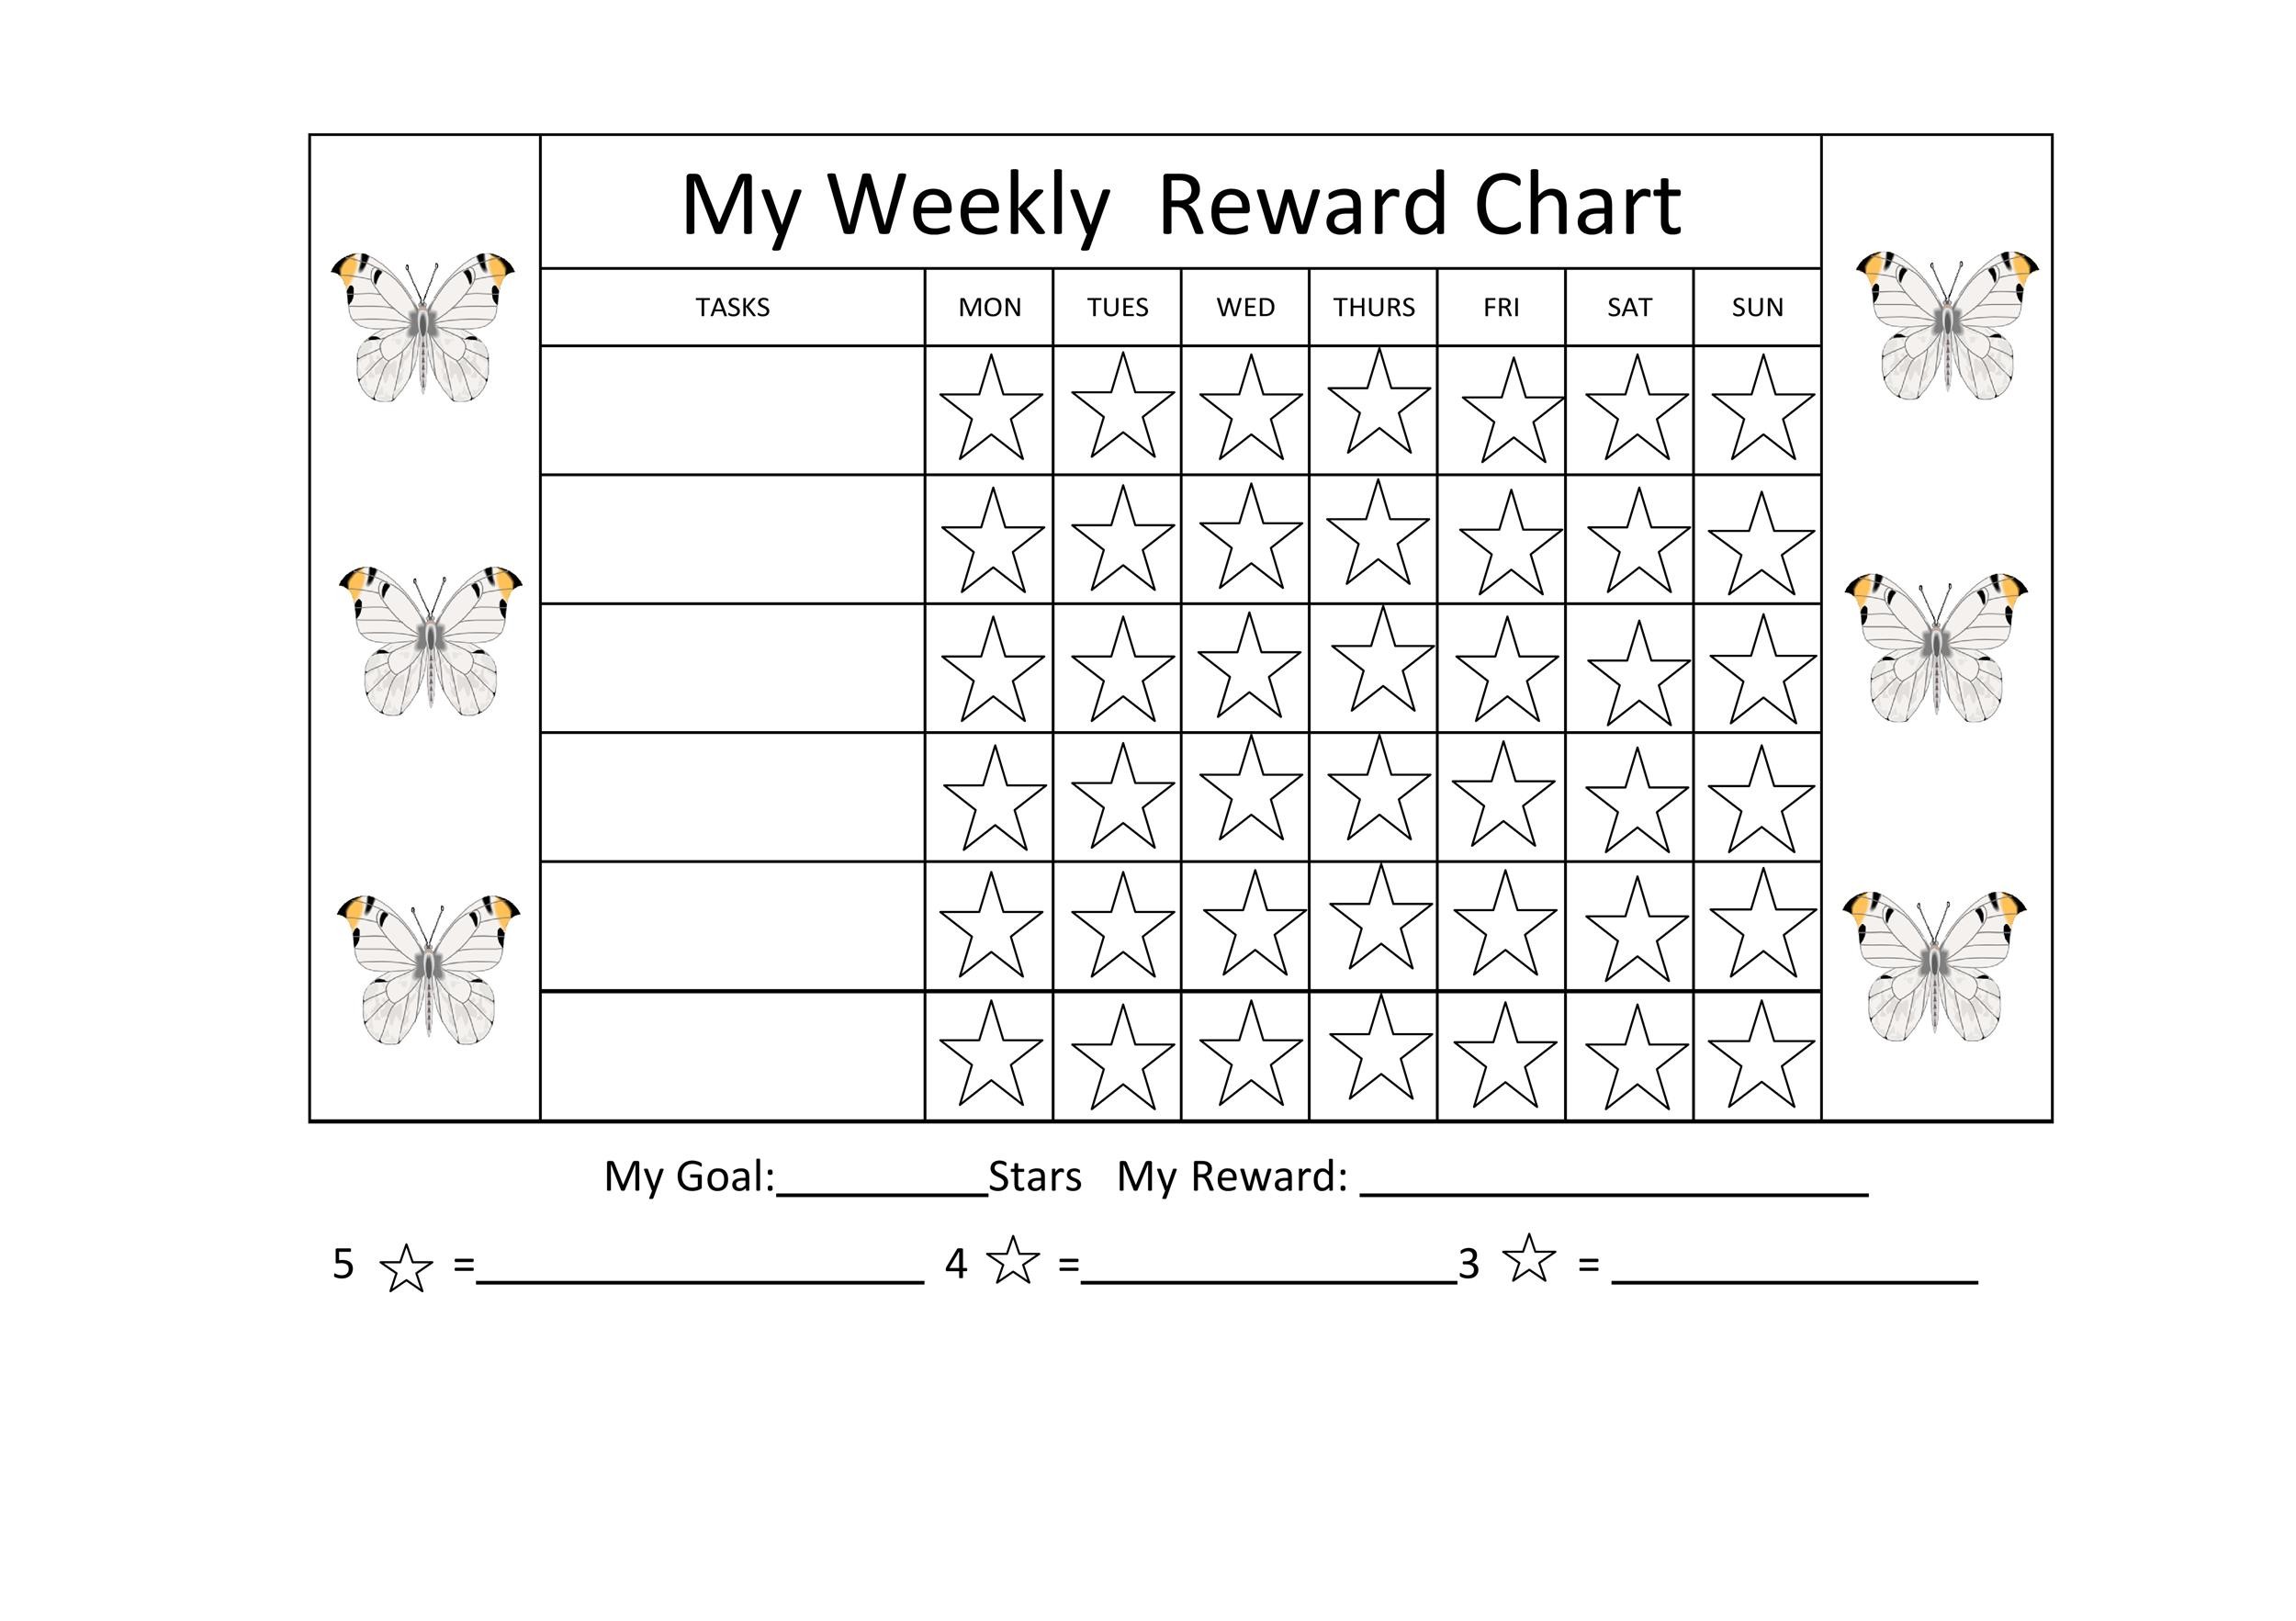 Positive Behavior Charts For Middle School